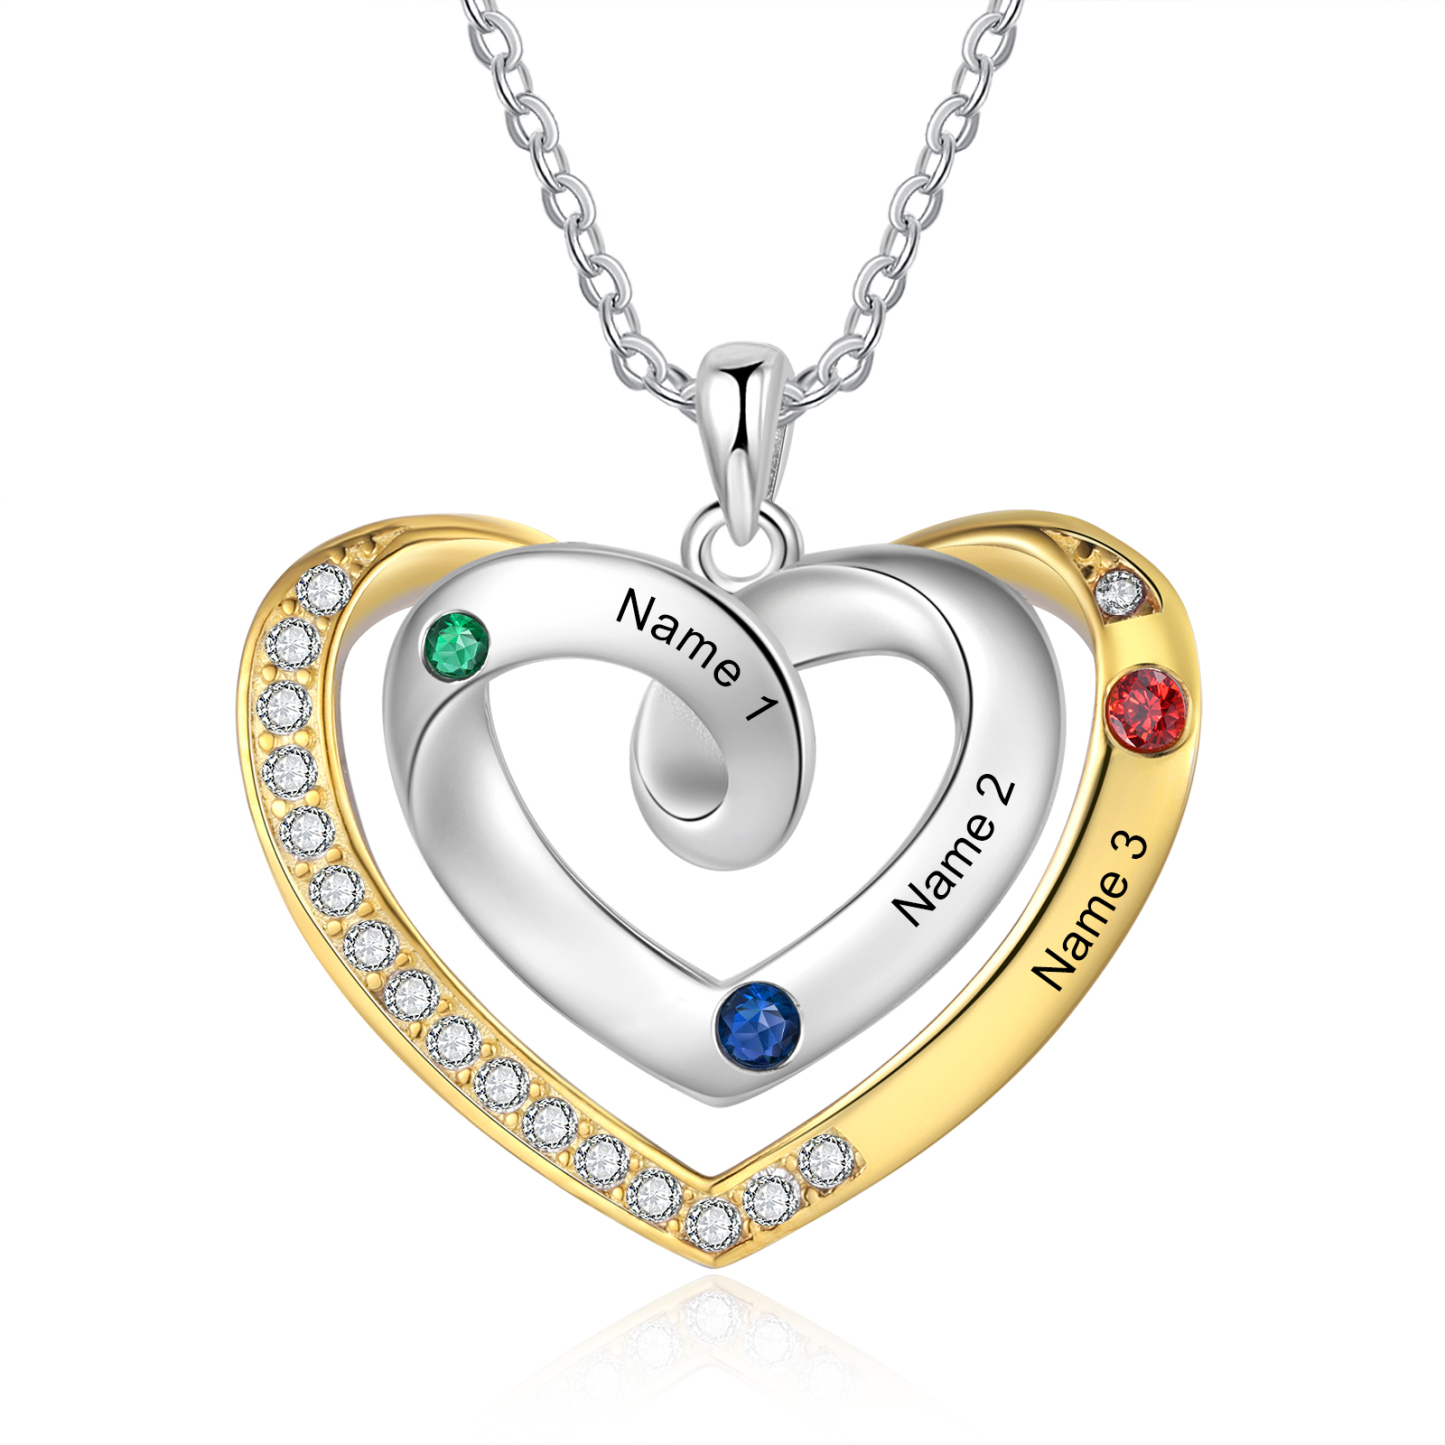 3 Names - Personalized Heart Necklace with Customized Names and Birthstone, A Perfect and Exquisite Gift for Her